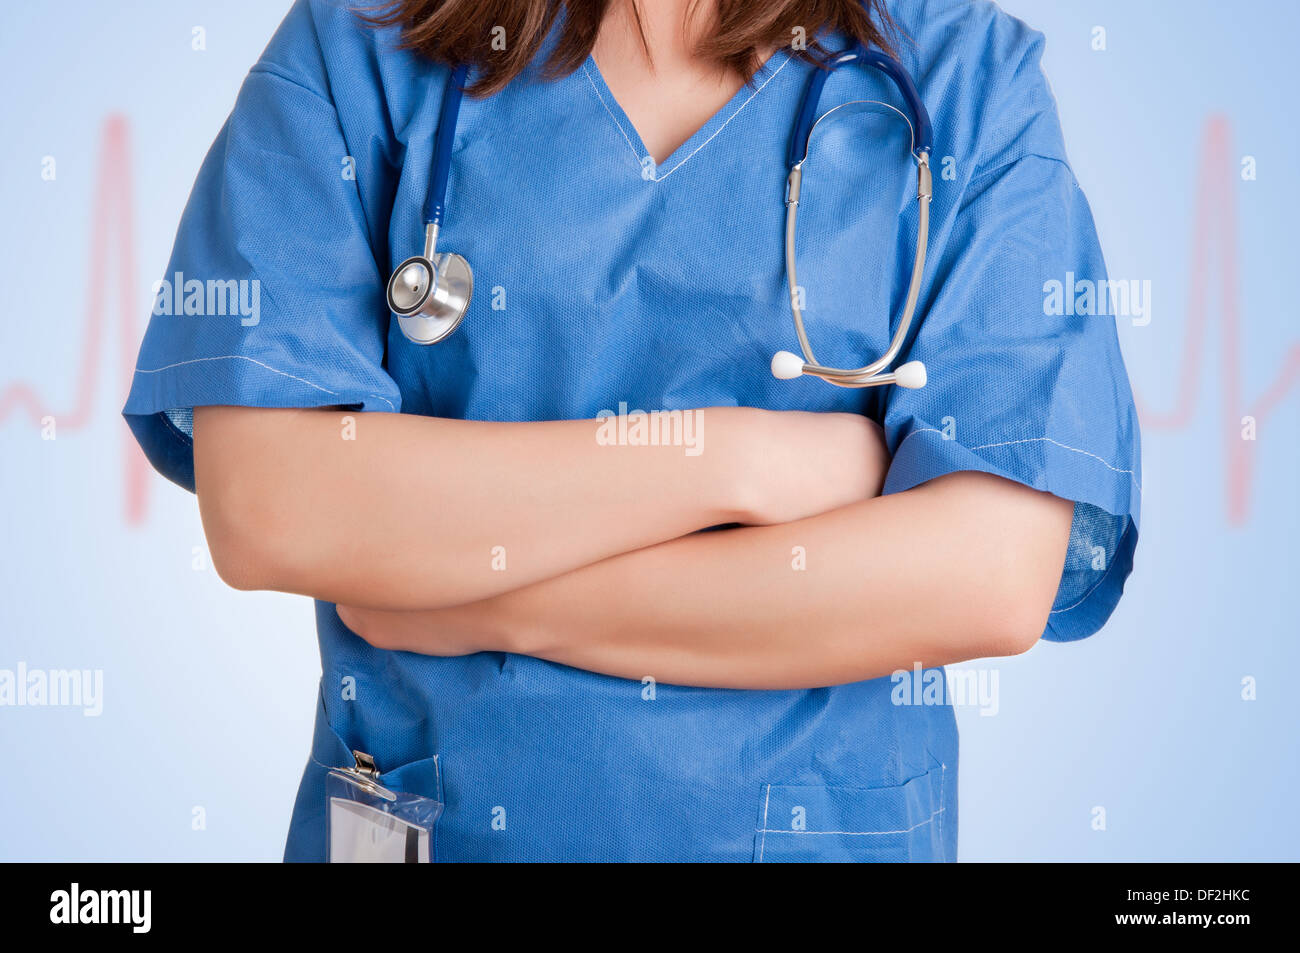 Young female doctor with scrubs and a stethoscope and arms crossed, isolated in white Stock Photo